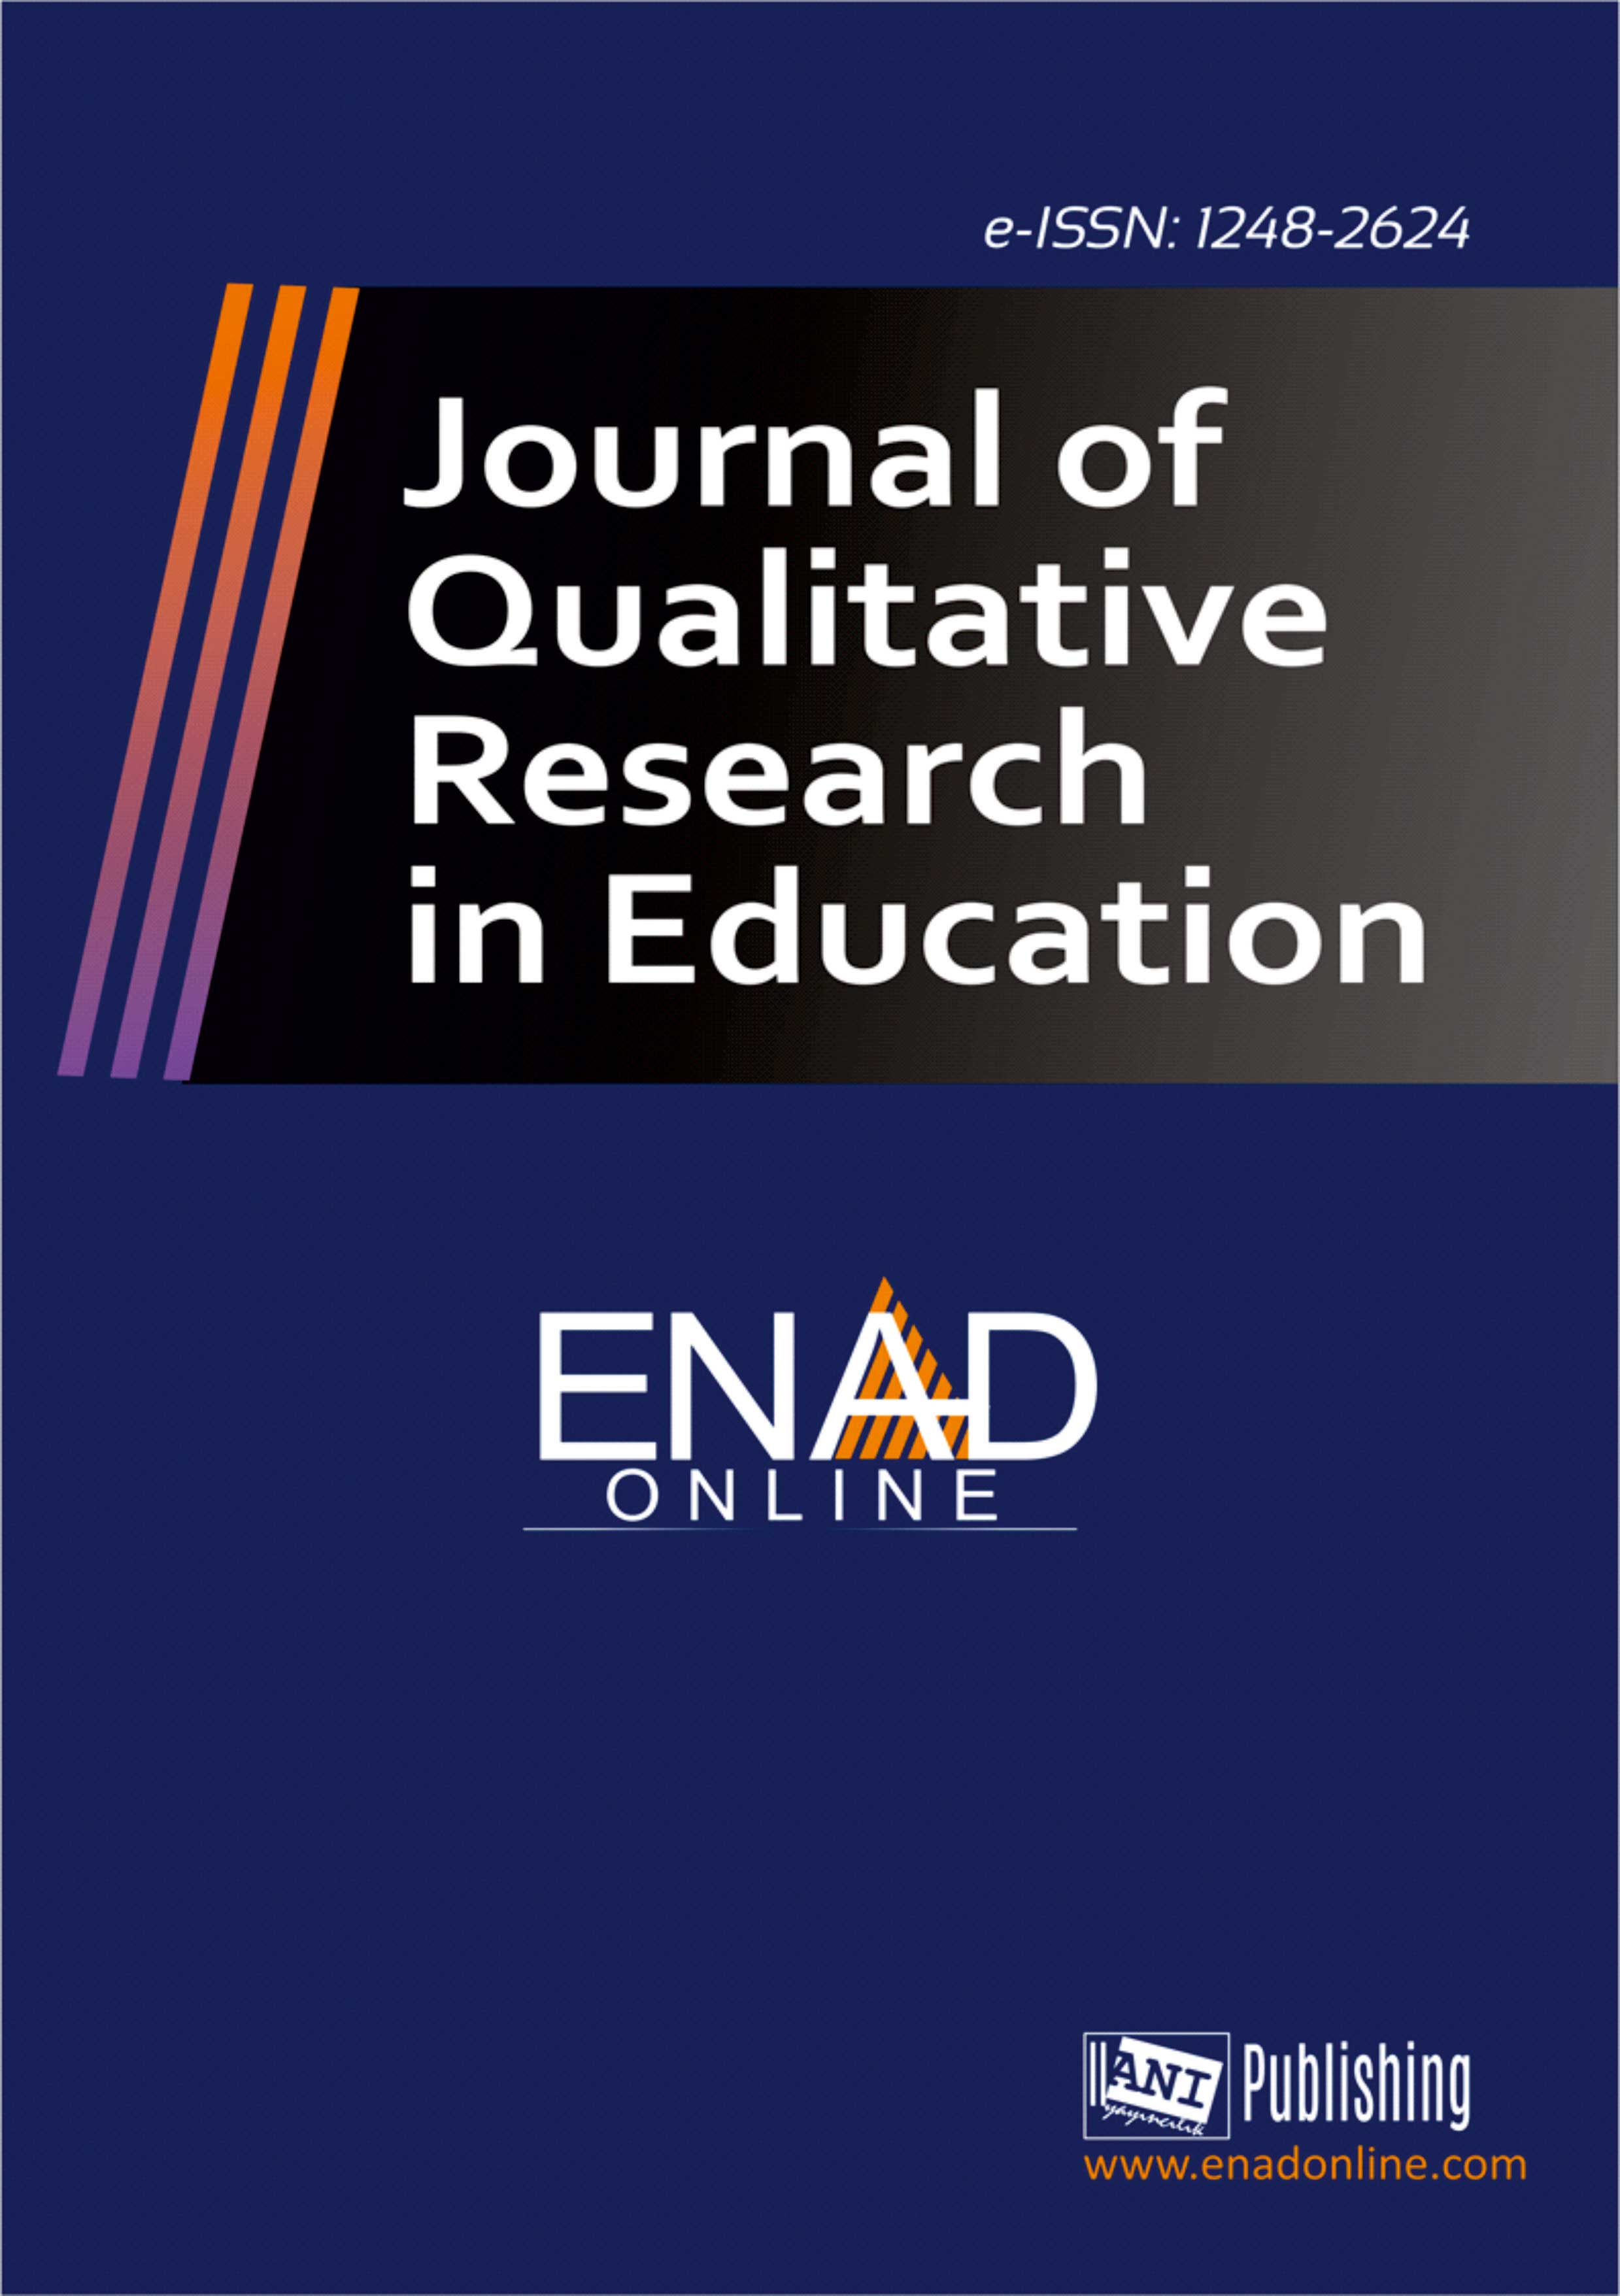 					View Vol. 4 Issue 1 (2016): Journal of Qualitative Research in Education
				